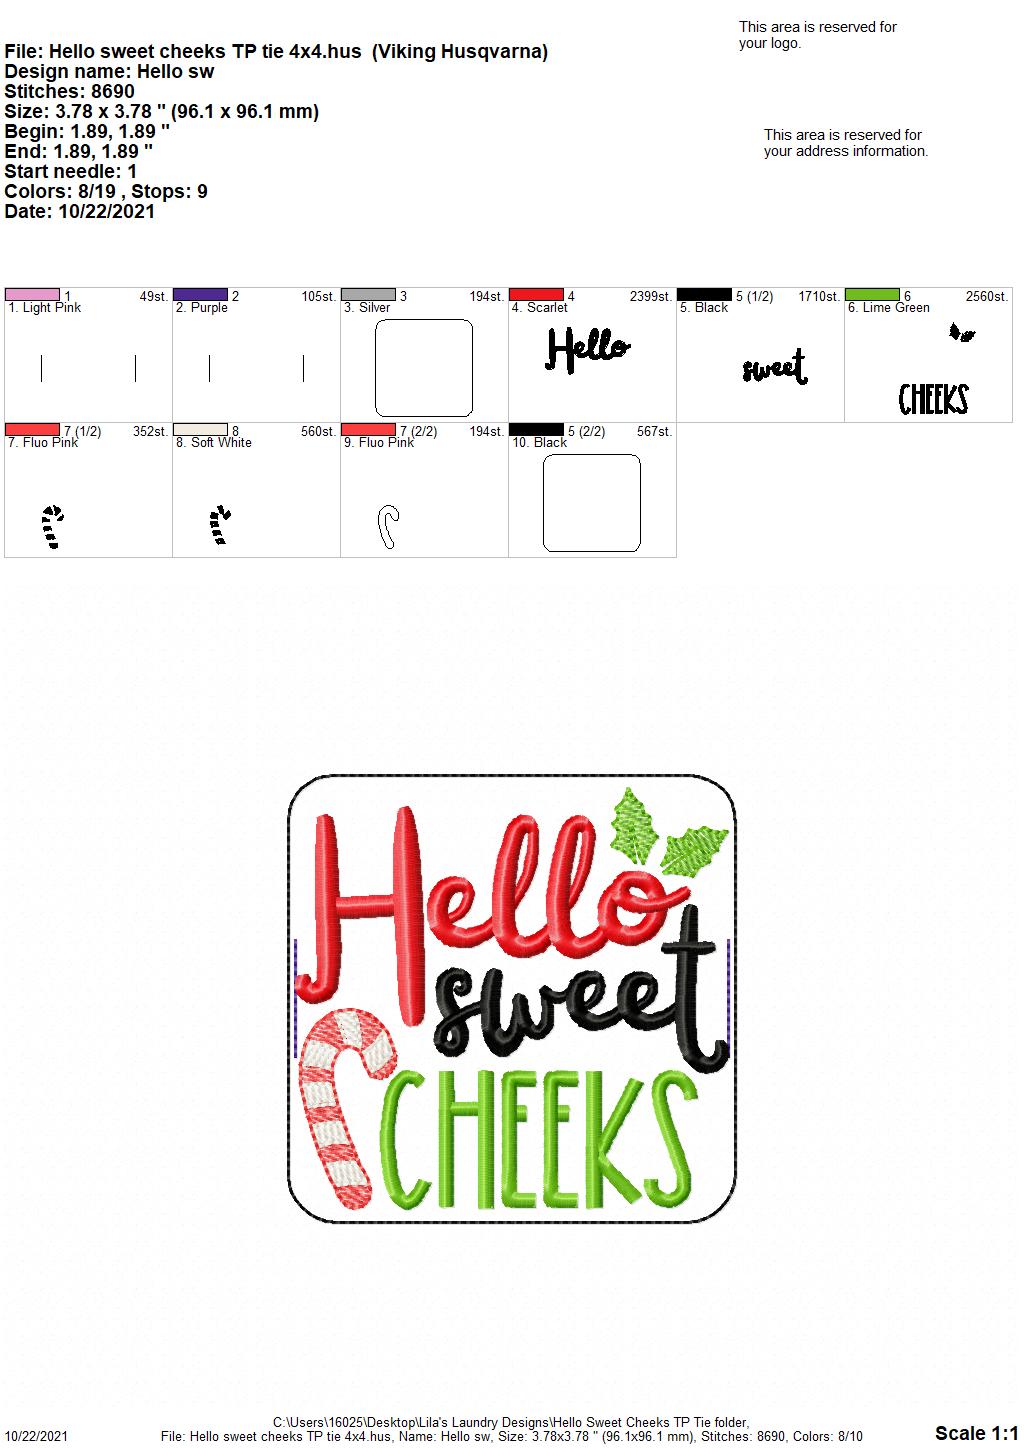 Holiday Hello Sweet Cheeks - TP tie 4x4 - DIGITAL Embroidery DESIGN